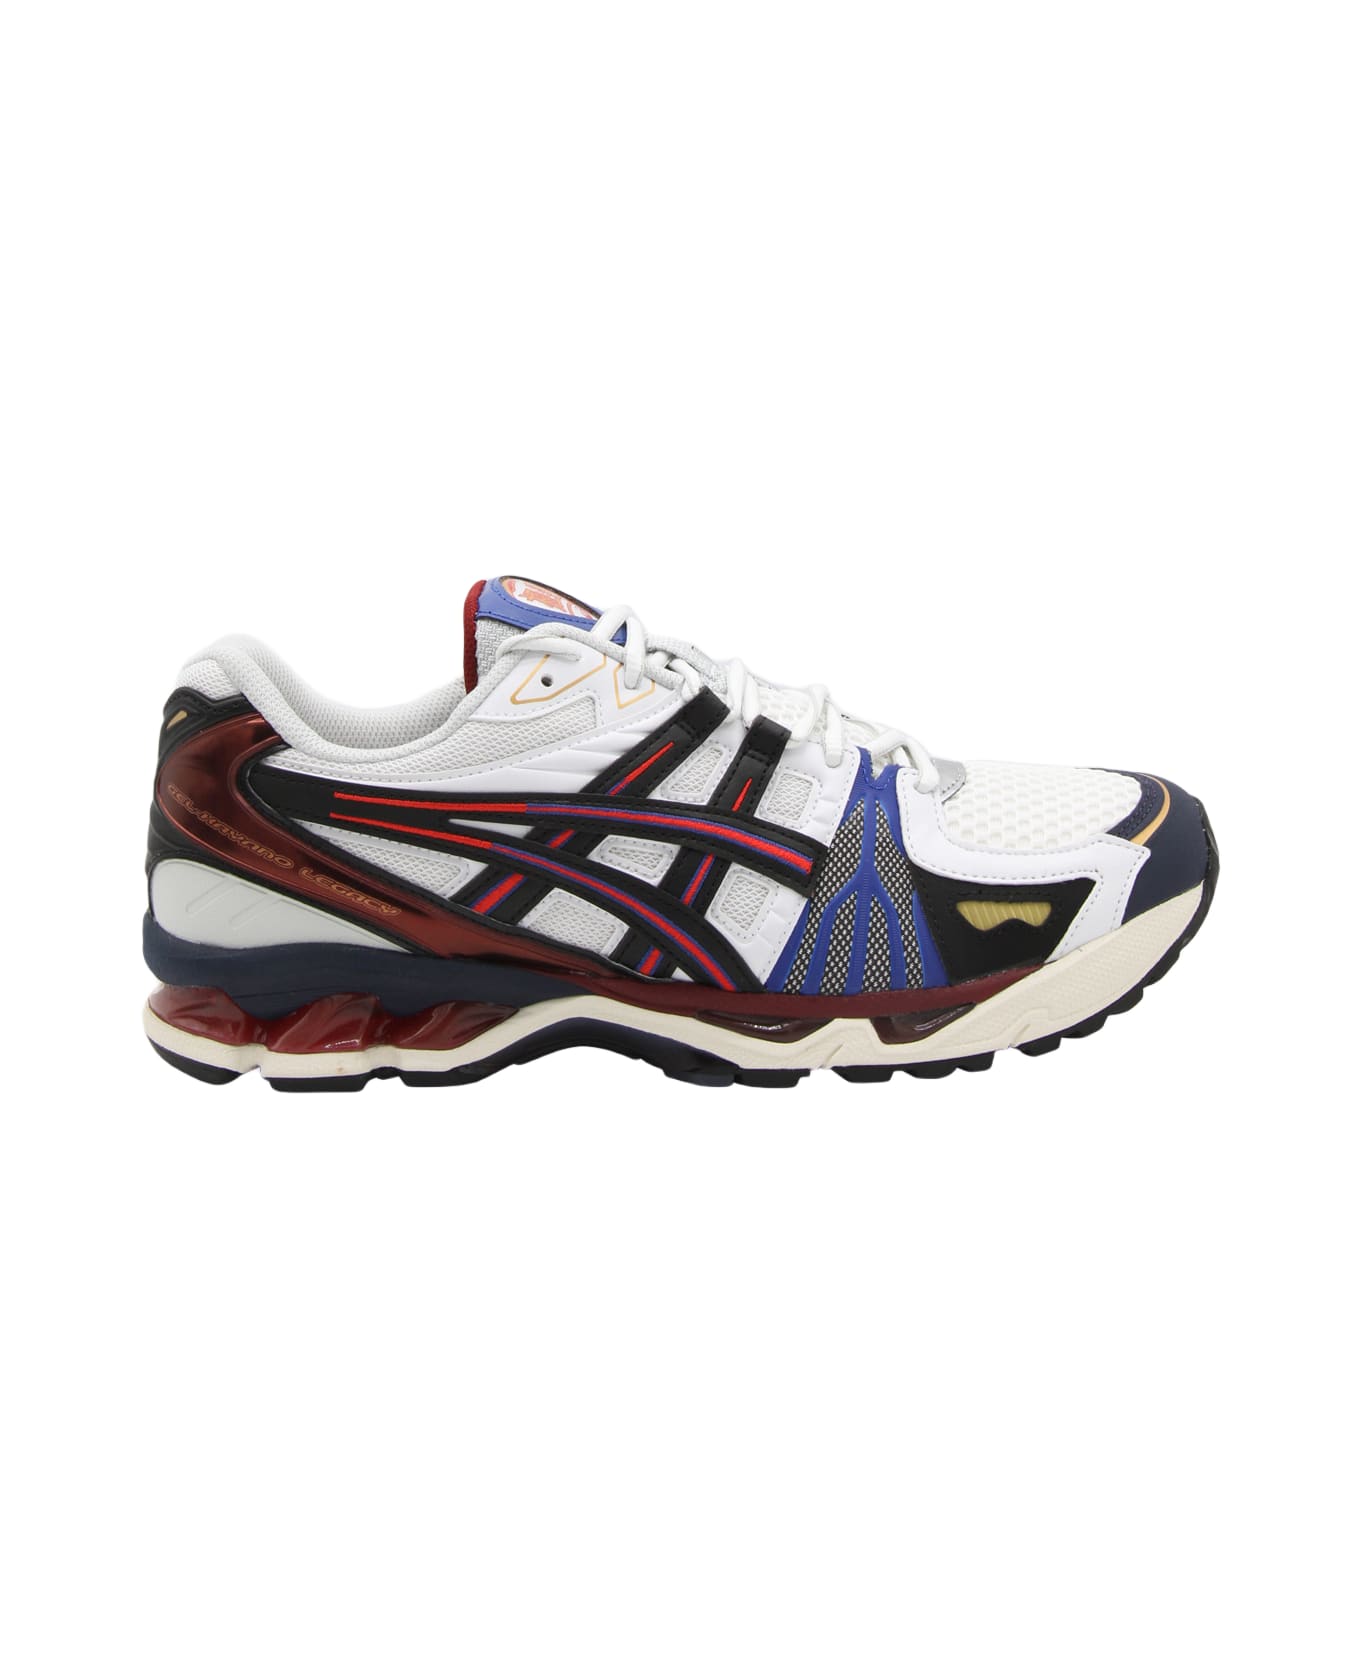 Asics White And Red Tech Gel Kayano Legacy Sneakers - White red